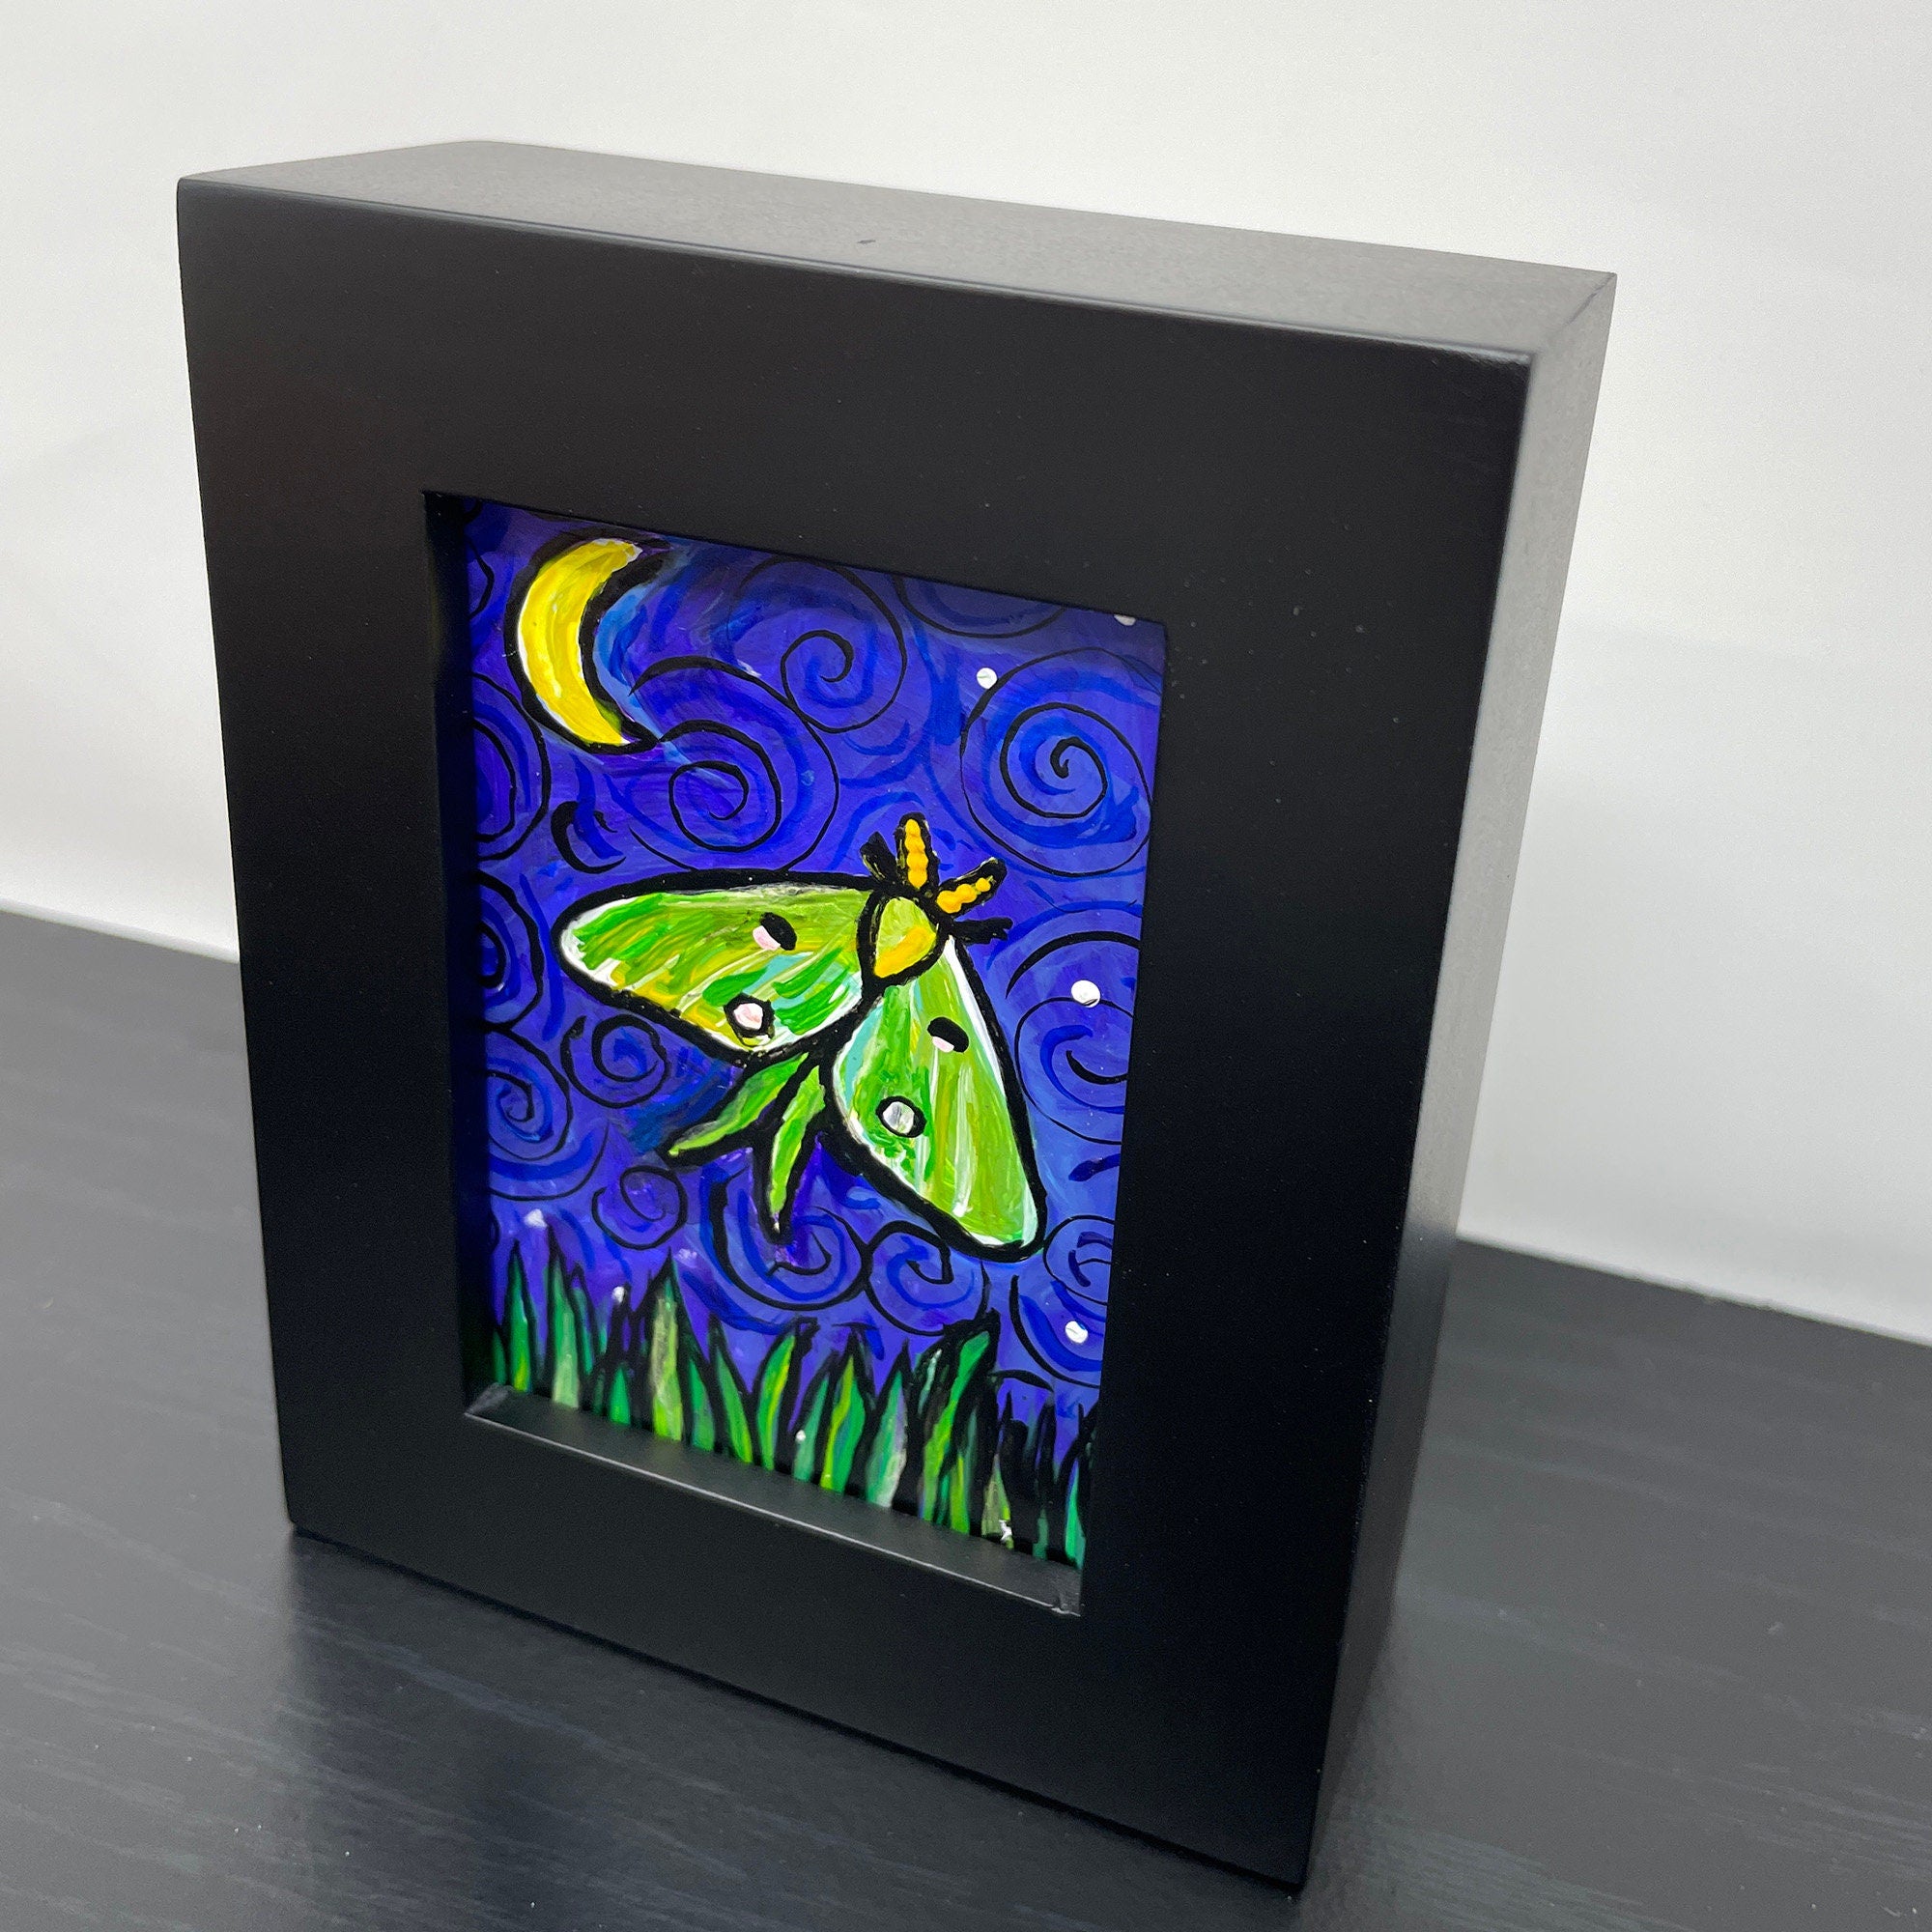 Side view of luna Moth painting in black wood frame siting on black table. Painting features green and yellow luna moth on night sky with crescent yellow moon and white stars. Long grasses dance along the bottom of the scene.